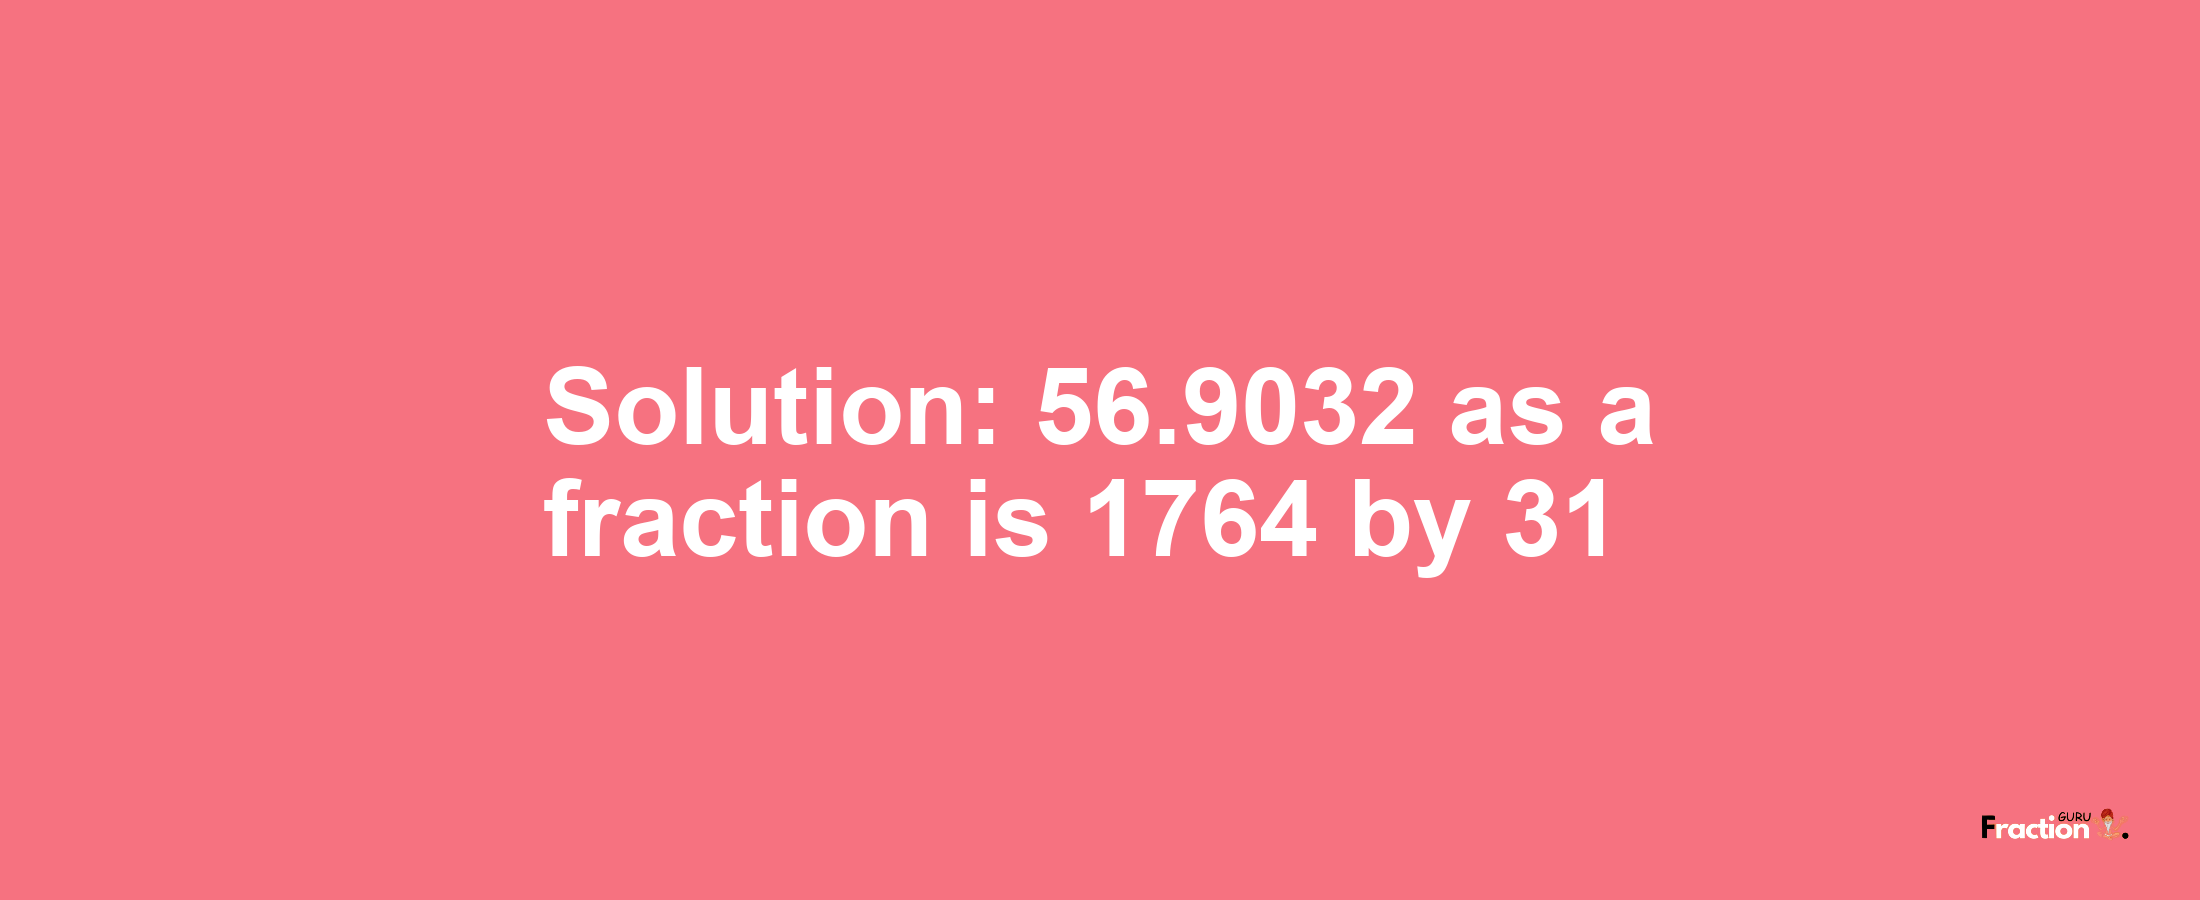 Solution:56.9032 as a fraction is 1764/31